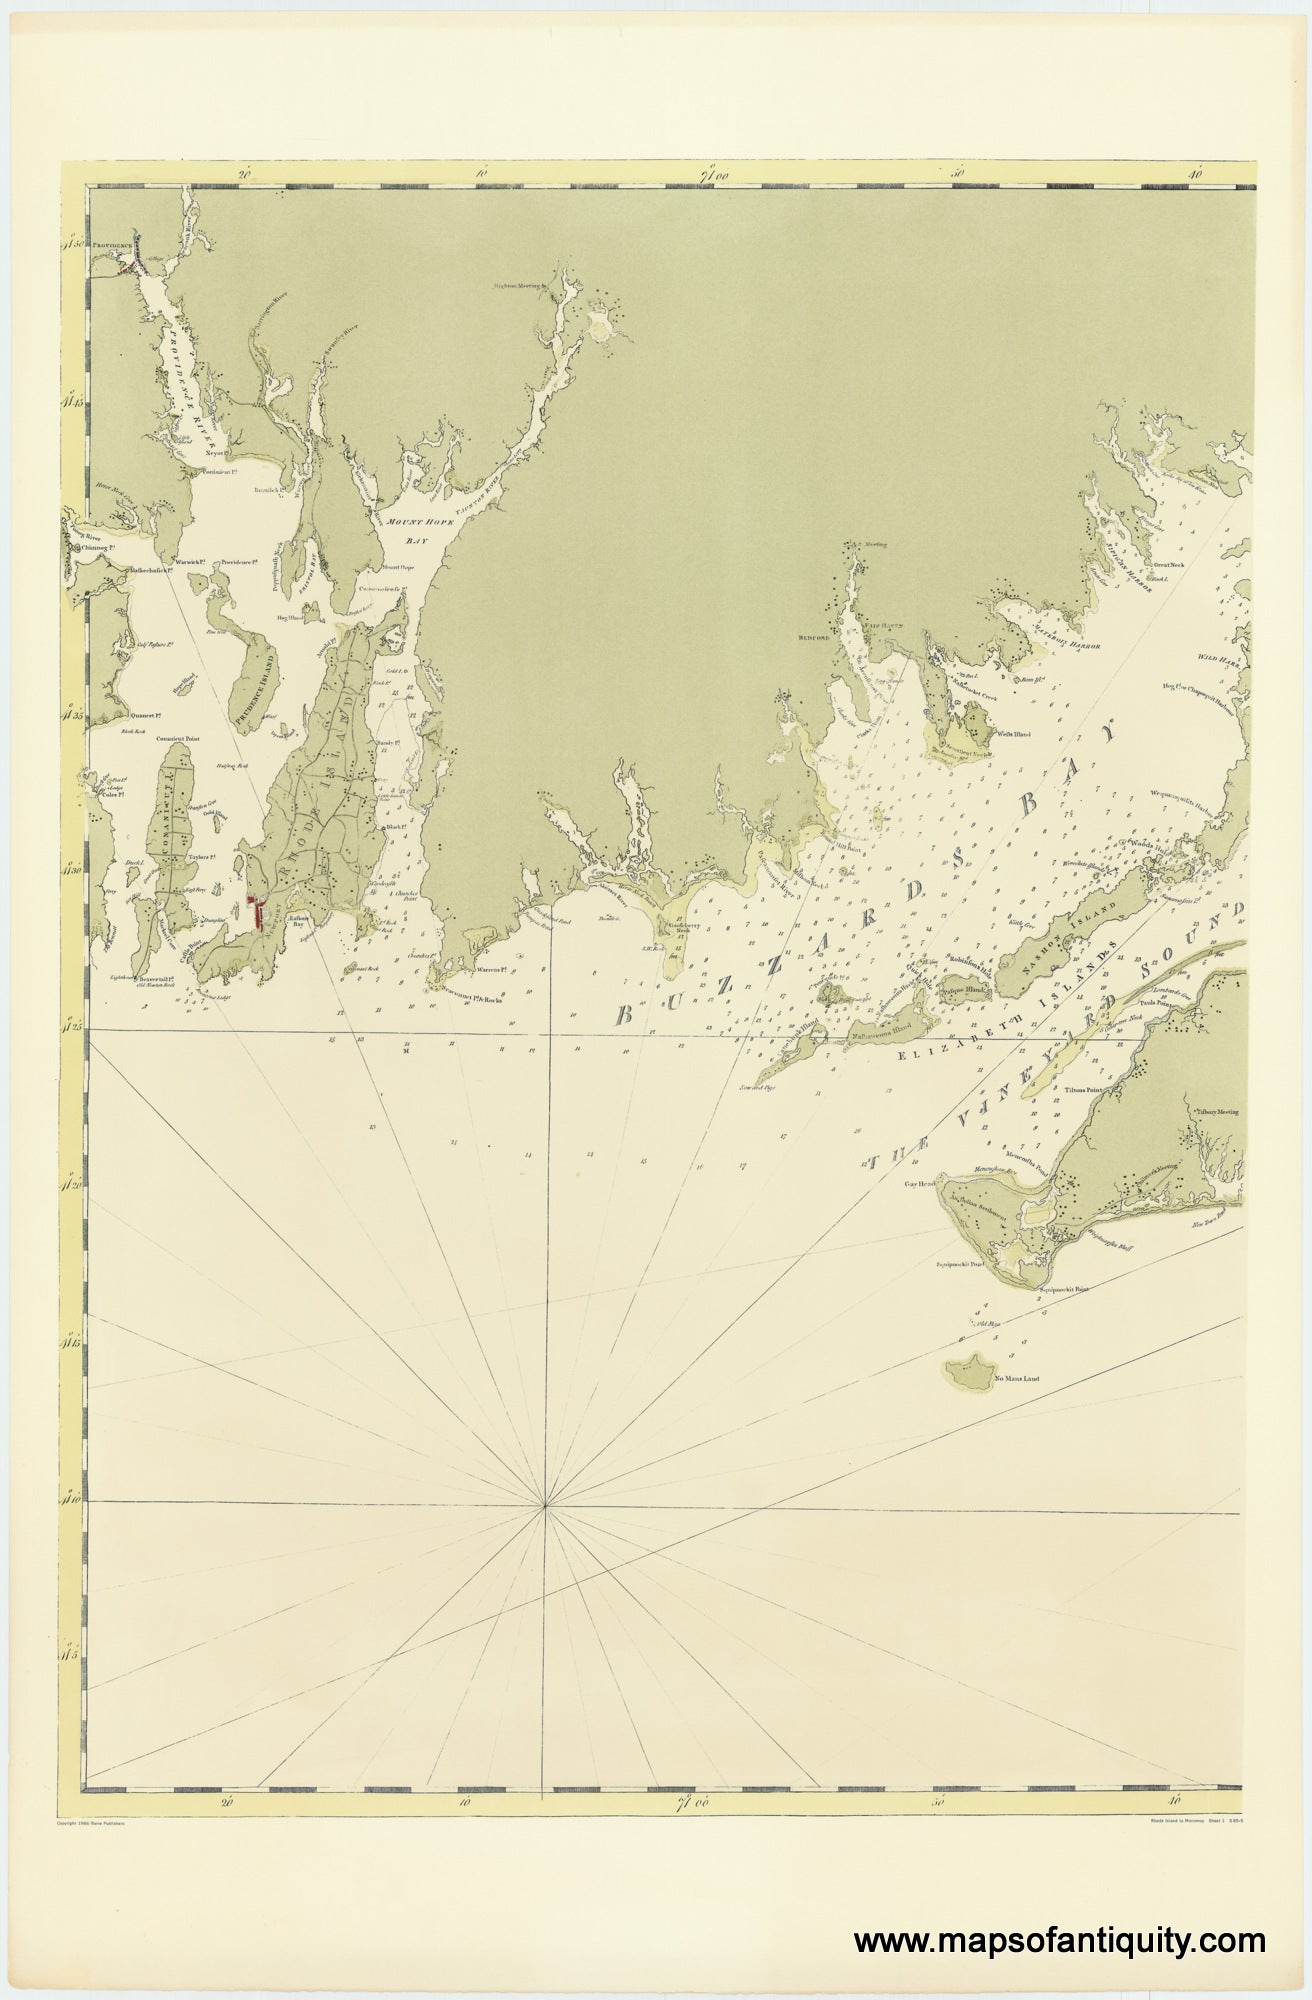 Reproduction-1700s-Reproduction-of-Des-Barres'-Chart-of-Providence-to-Onset-and-Newport-to-Woods-Hole-Narragansett-Elizabeth-Islands-Martha's-Vineyard-1700s-Maps-of-Antiquity